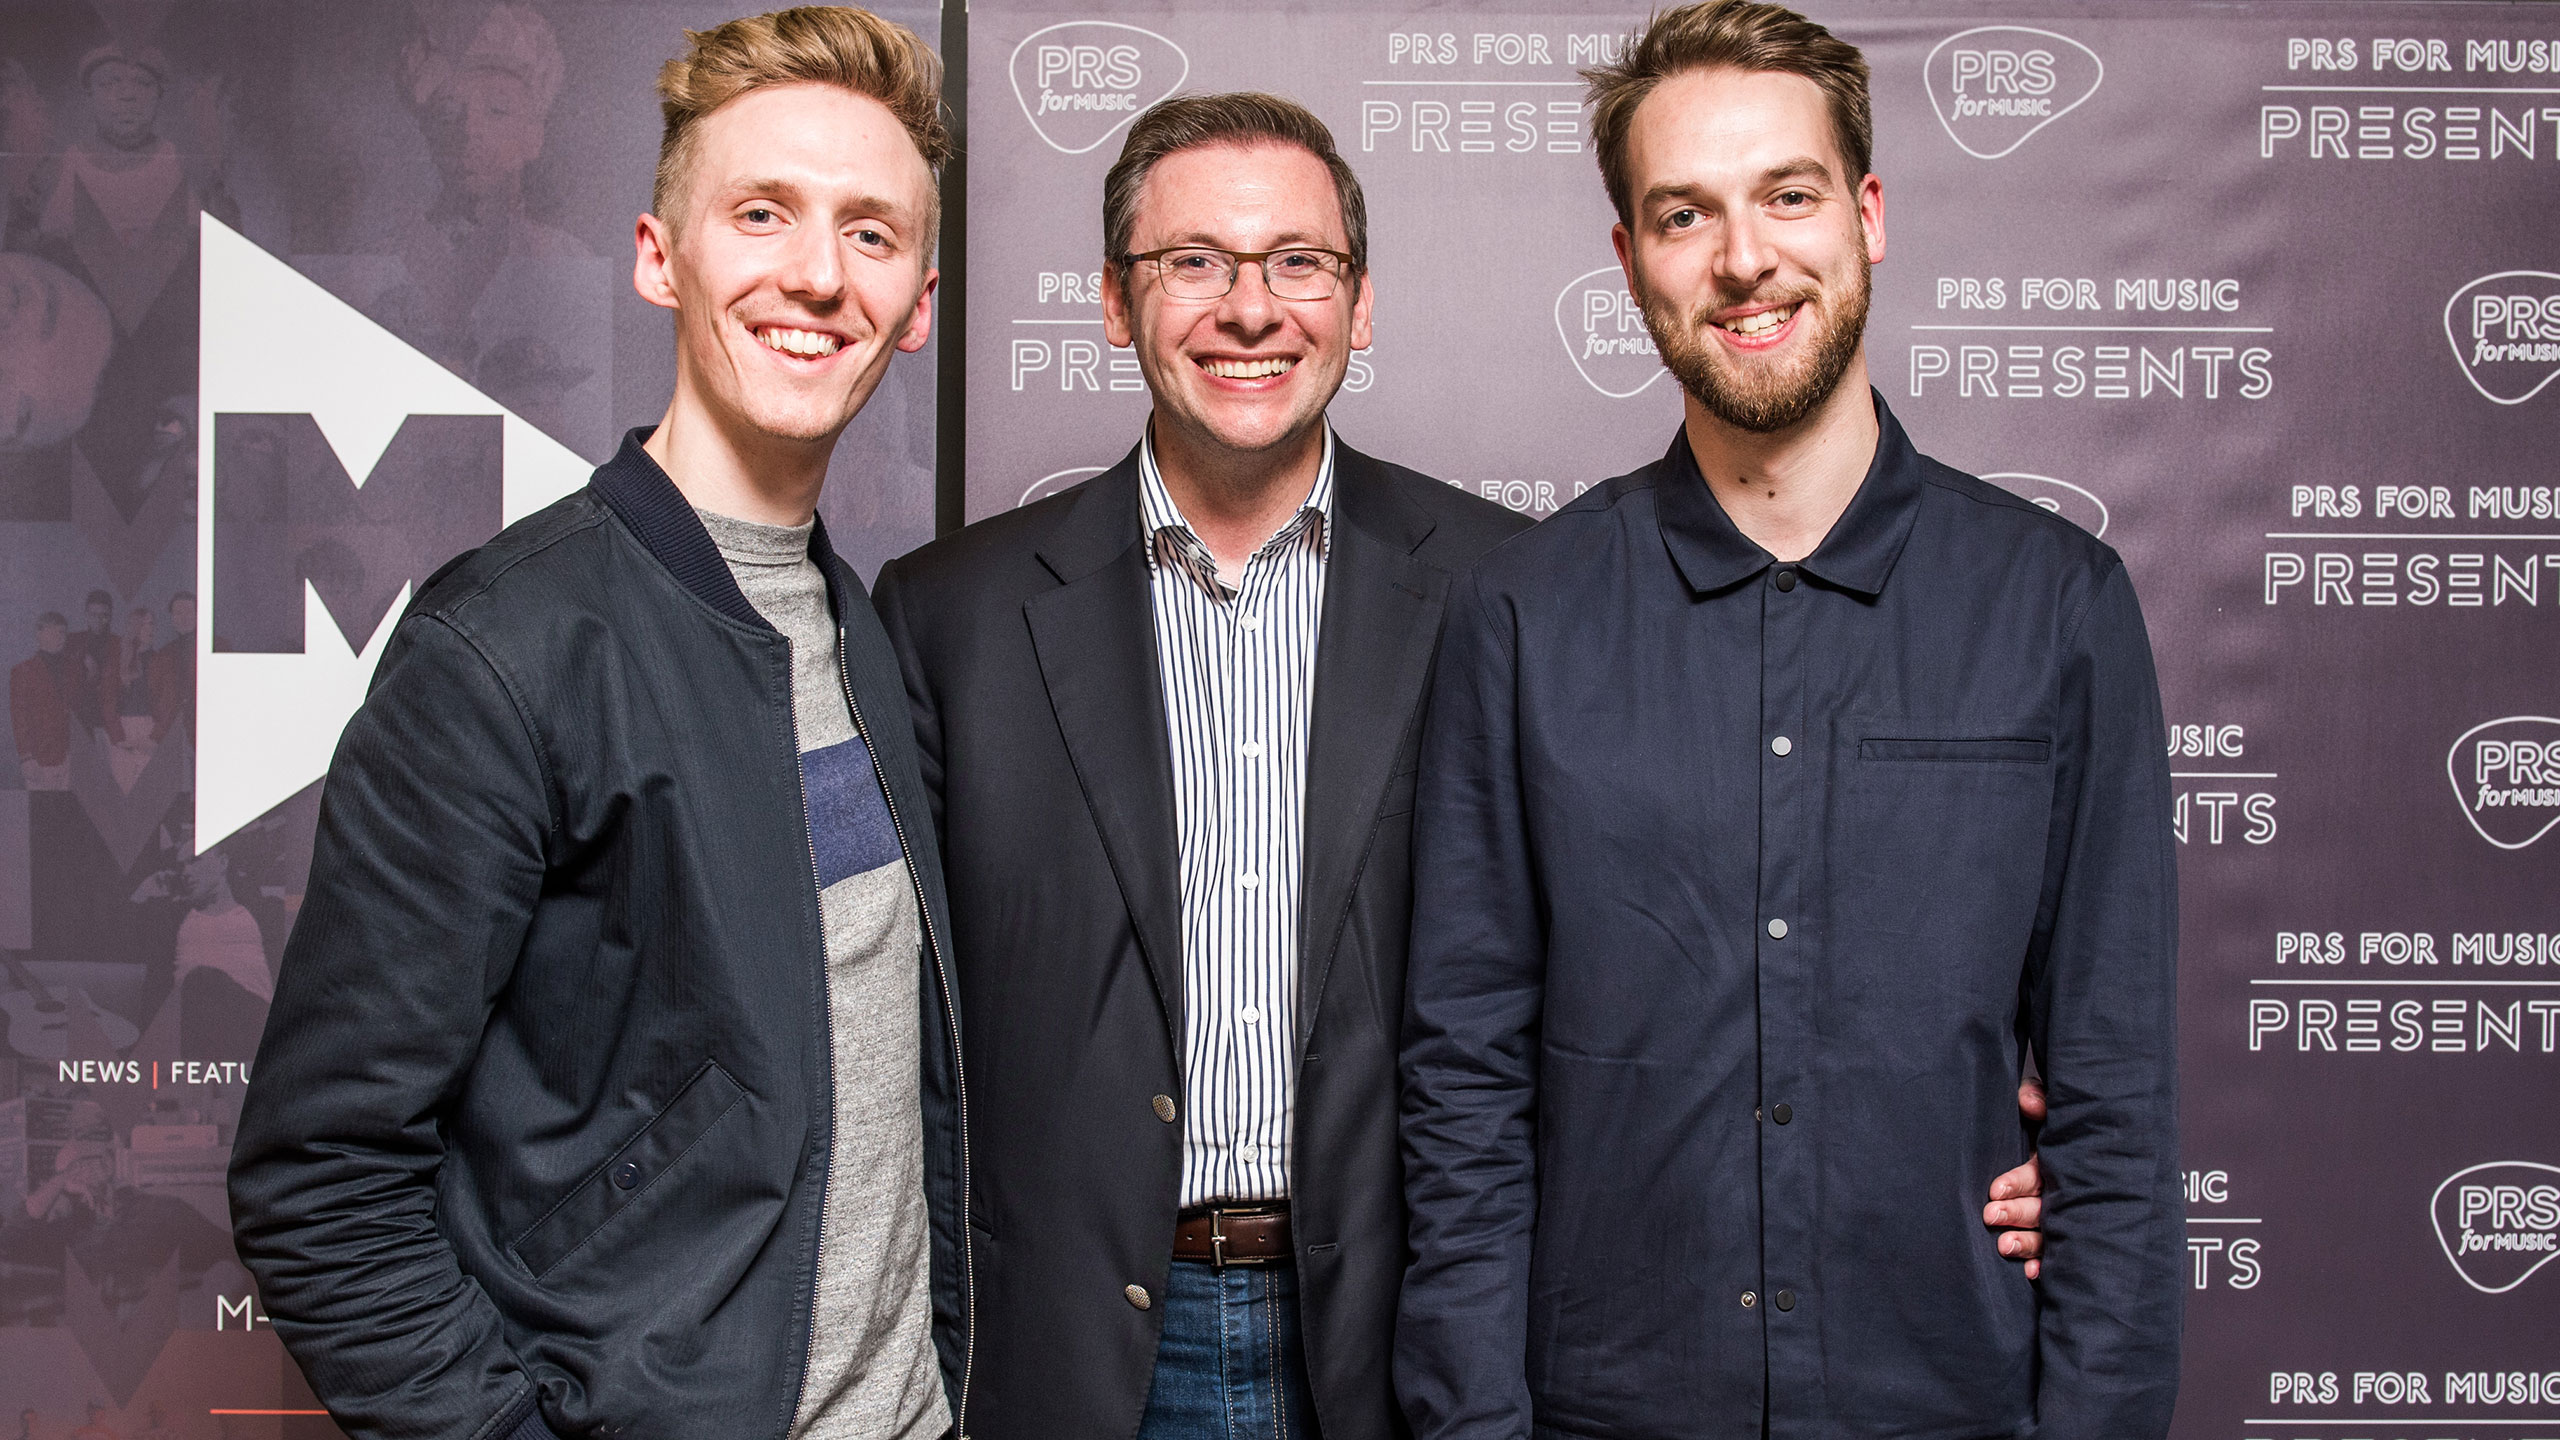 James Hatcher (Honne), Paul Clements (executive director of membership at PRS for Music) and Andy Clutterbuck (Honne) at PRS Presents